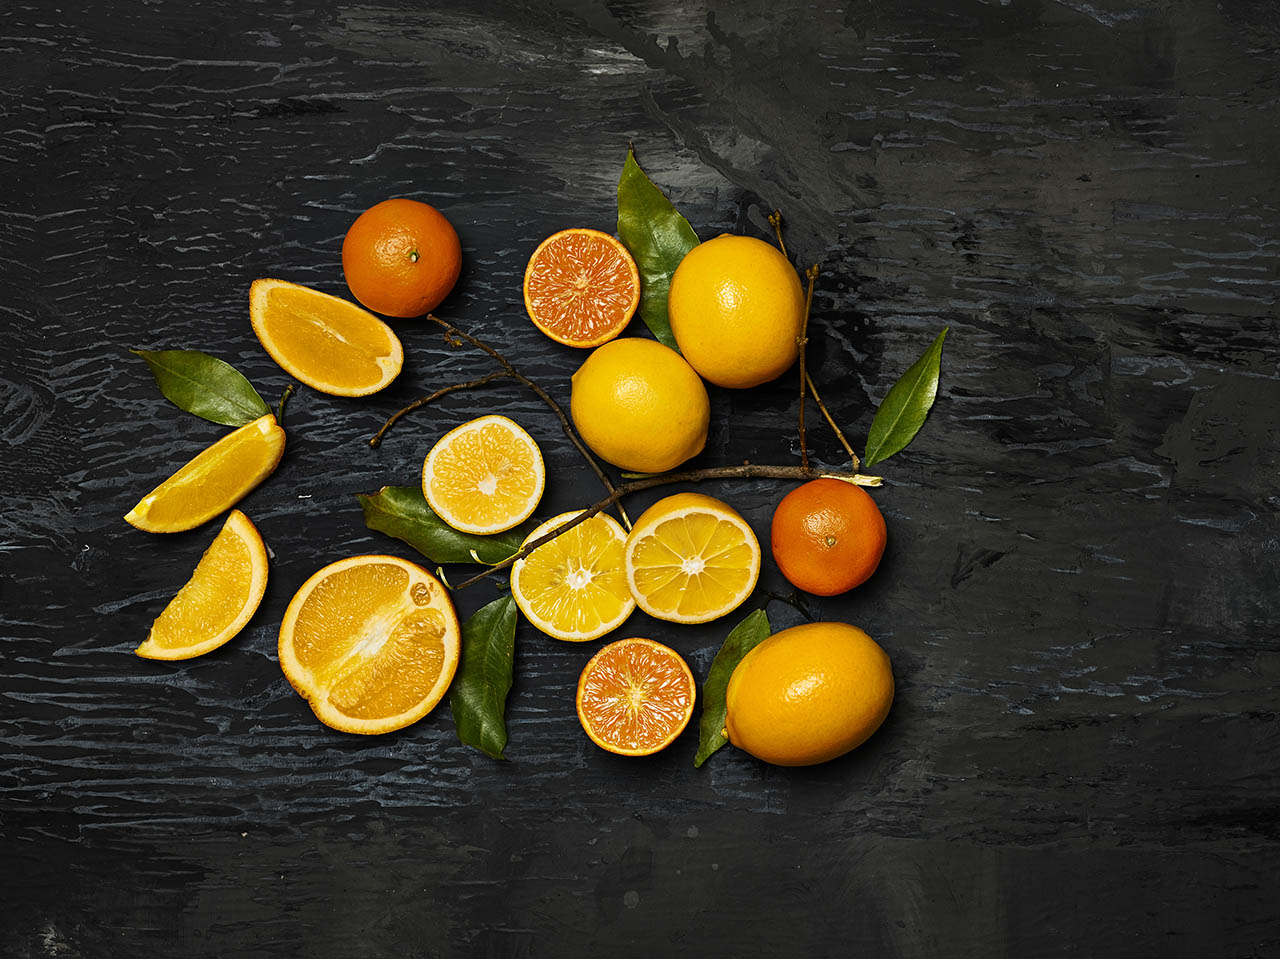  Citrus importer and distributor in France and Europe - Beva Fruits International (BFI)